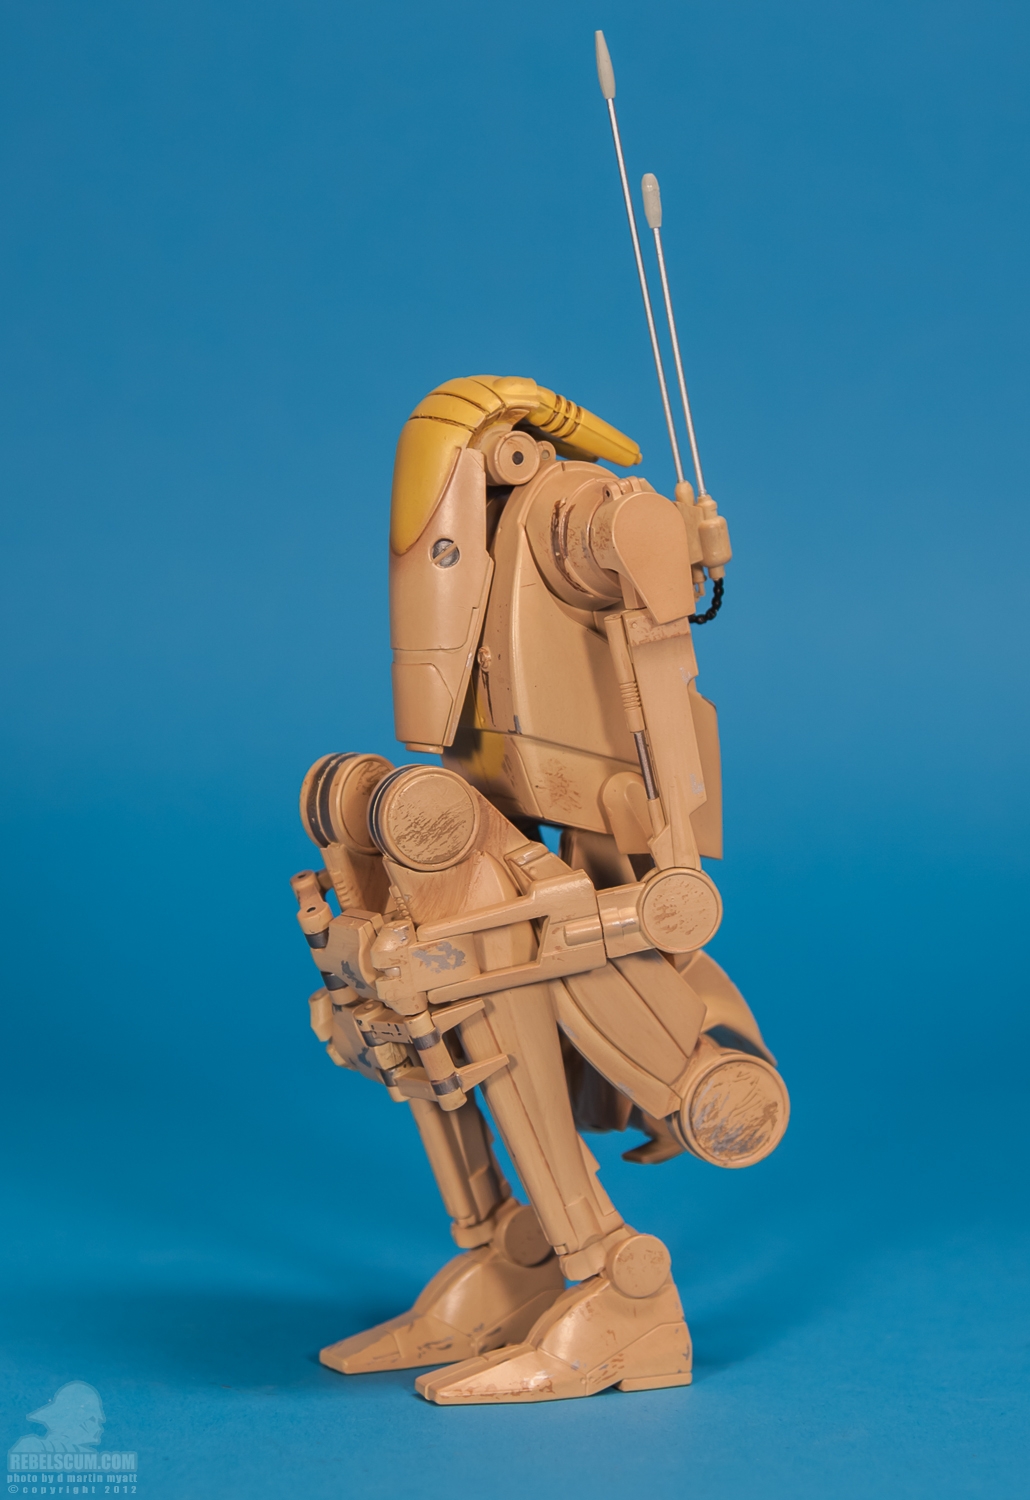 OOM-9_Battle_Droid_Commander_Sideshow_Collectibles-07.jpg